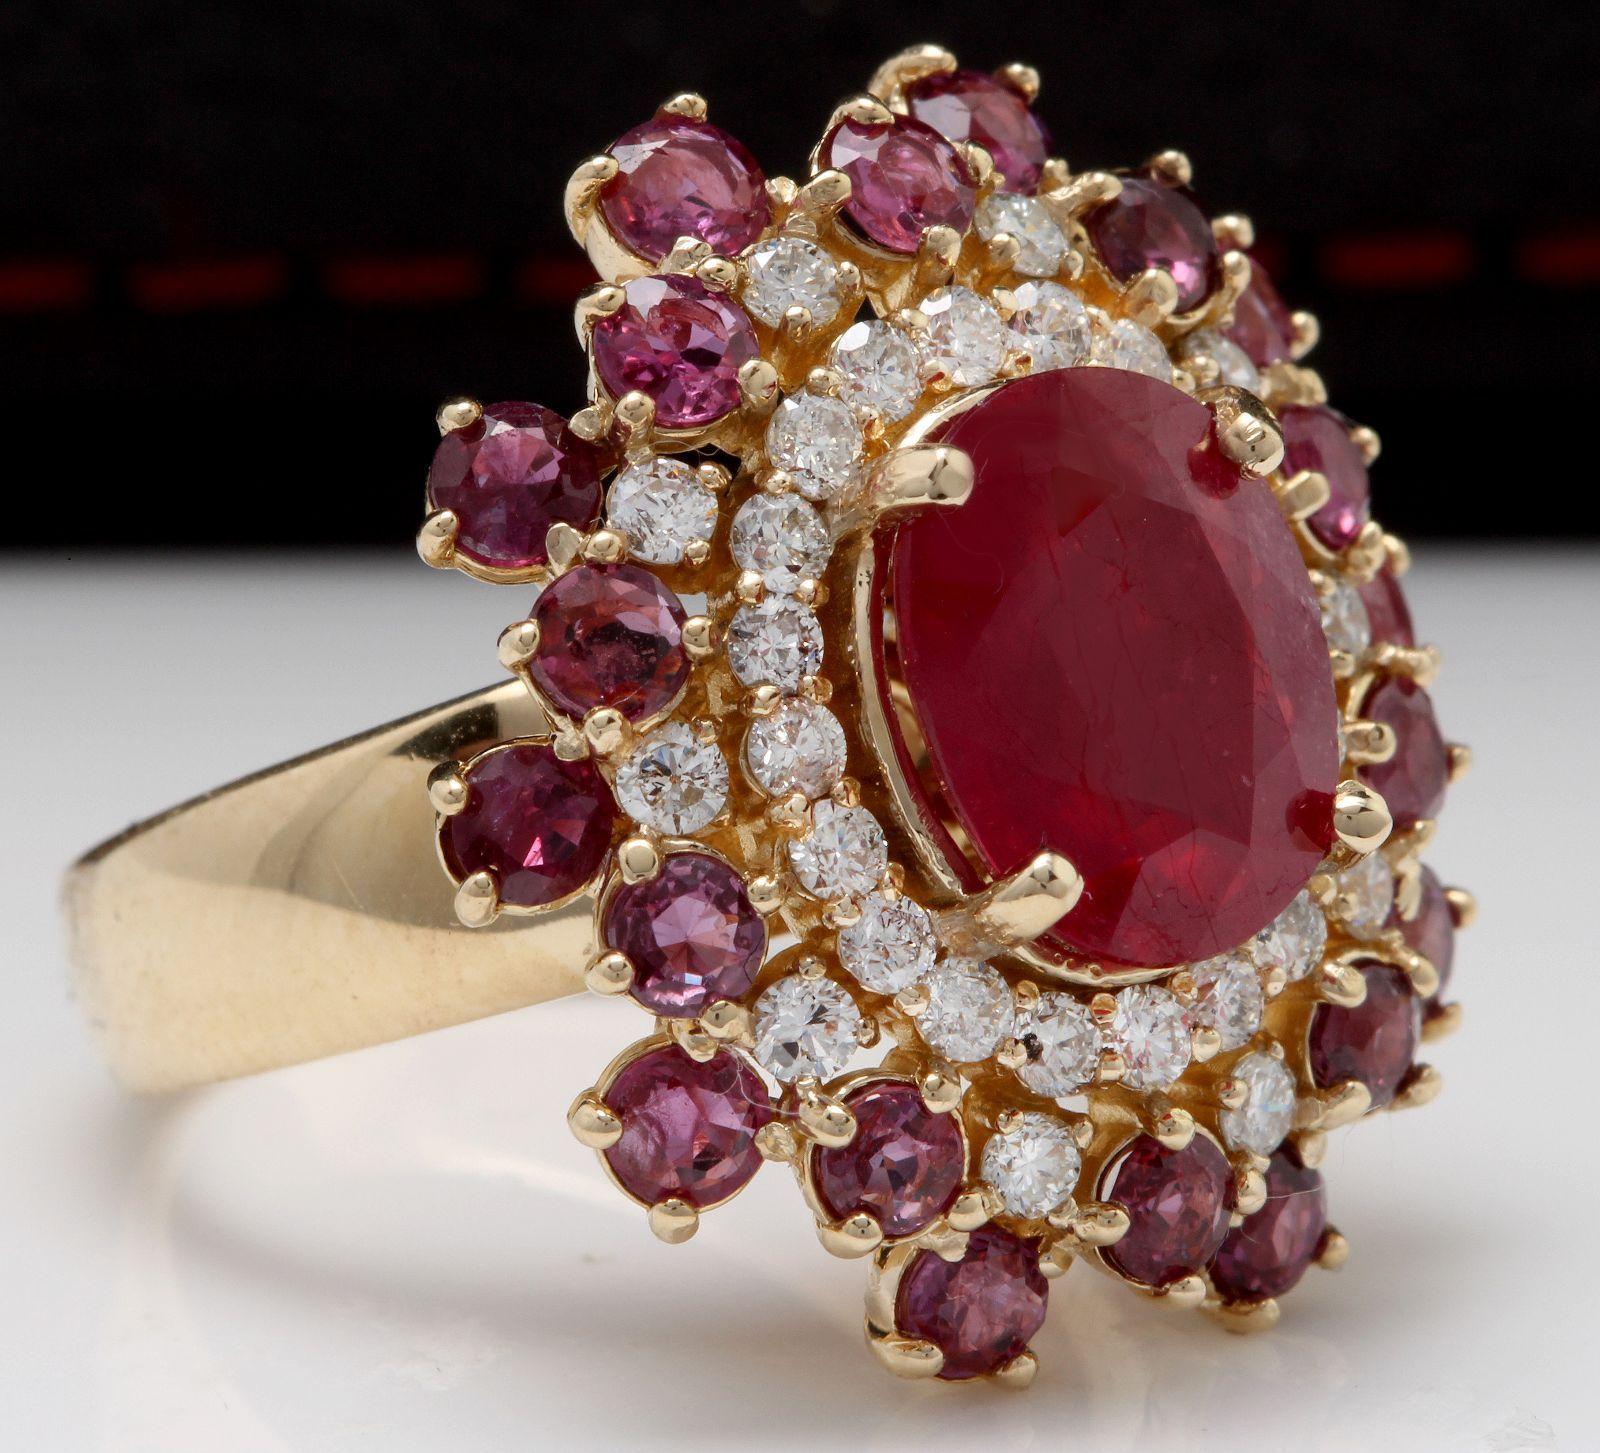 9.57 Carats Impressive Natural Red Ruby and Diamond 14K Yellow Gold Ring

Total Red Ruby Weight is: Approx. 8.47 Carats

Center Ruby Weight is: Approx. 5.47 Carats

Center Ruby Treatment: Lead Glass Filling

Center Ruby Measures: Approx. 11.00 x